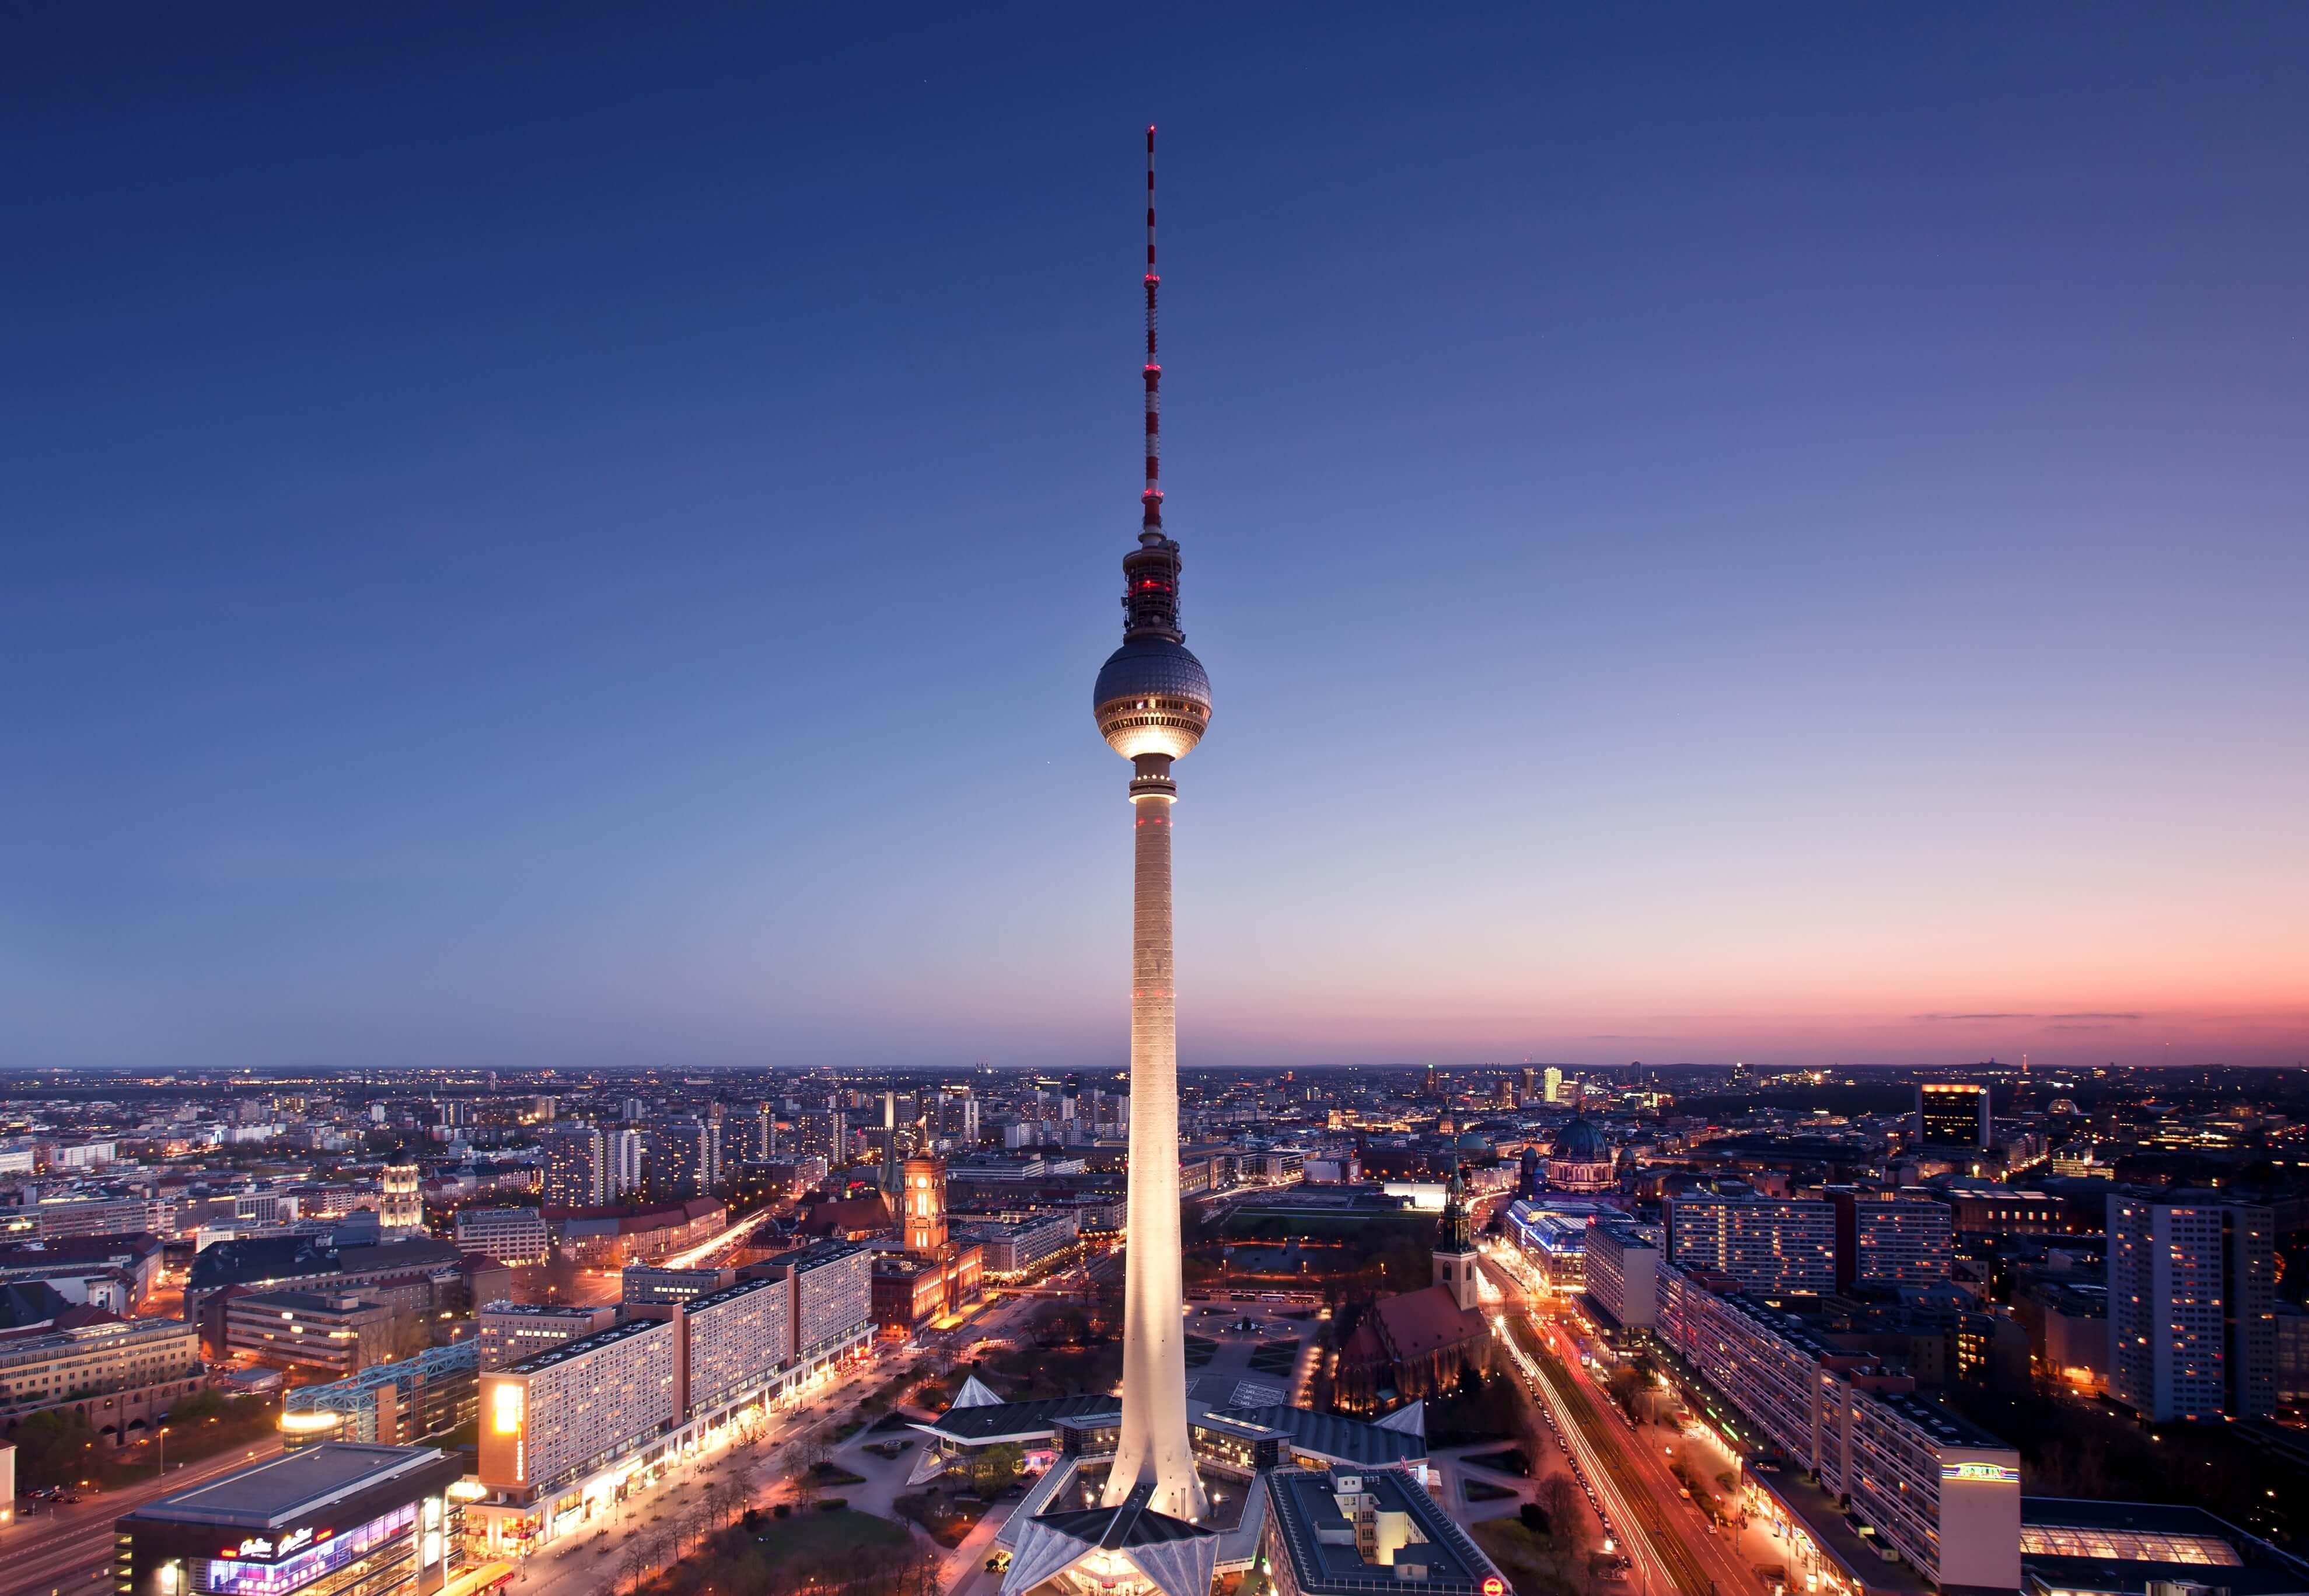 Berlin Television Tower image